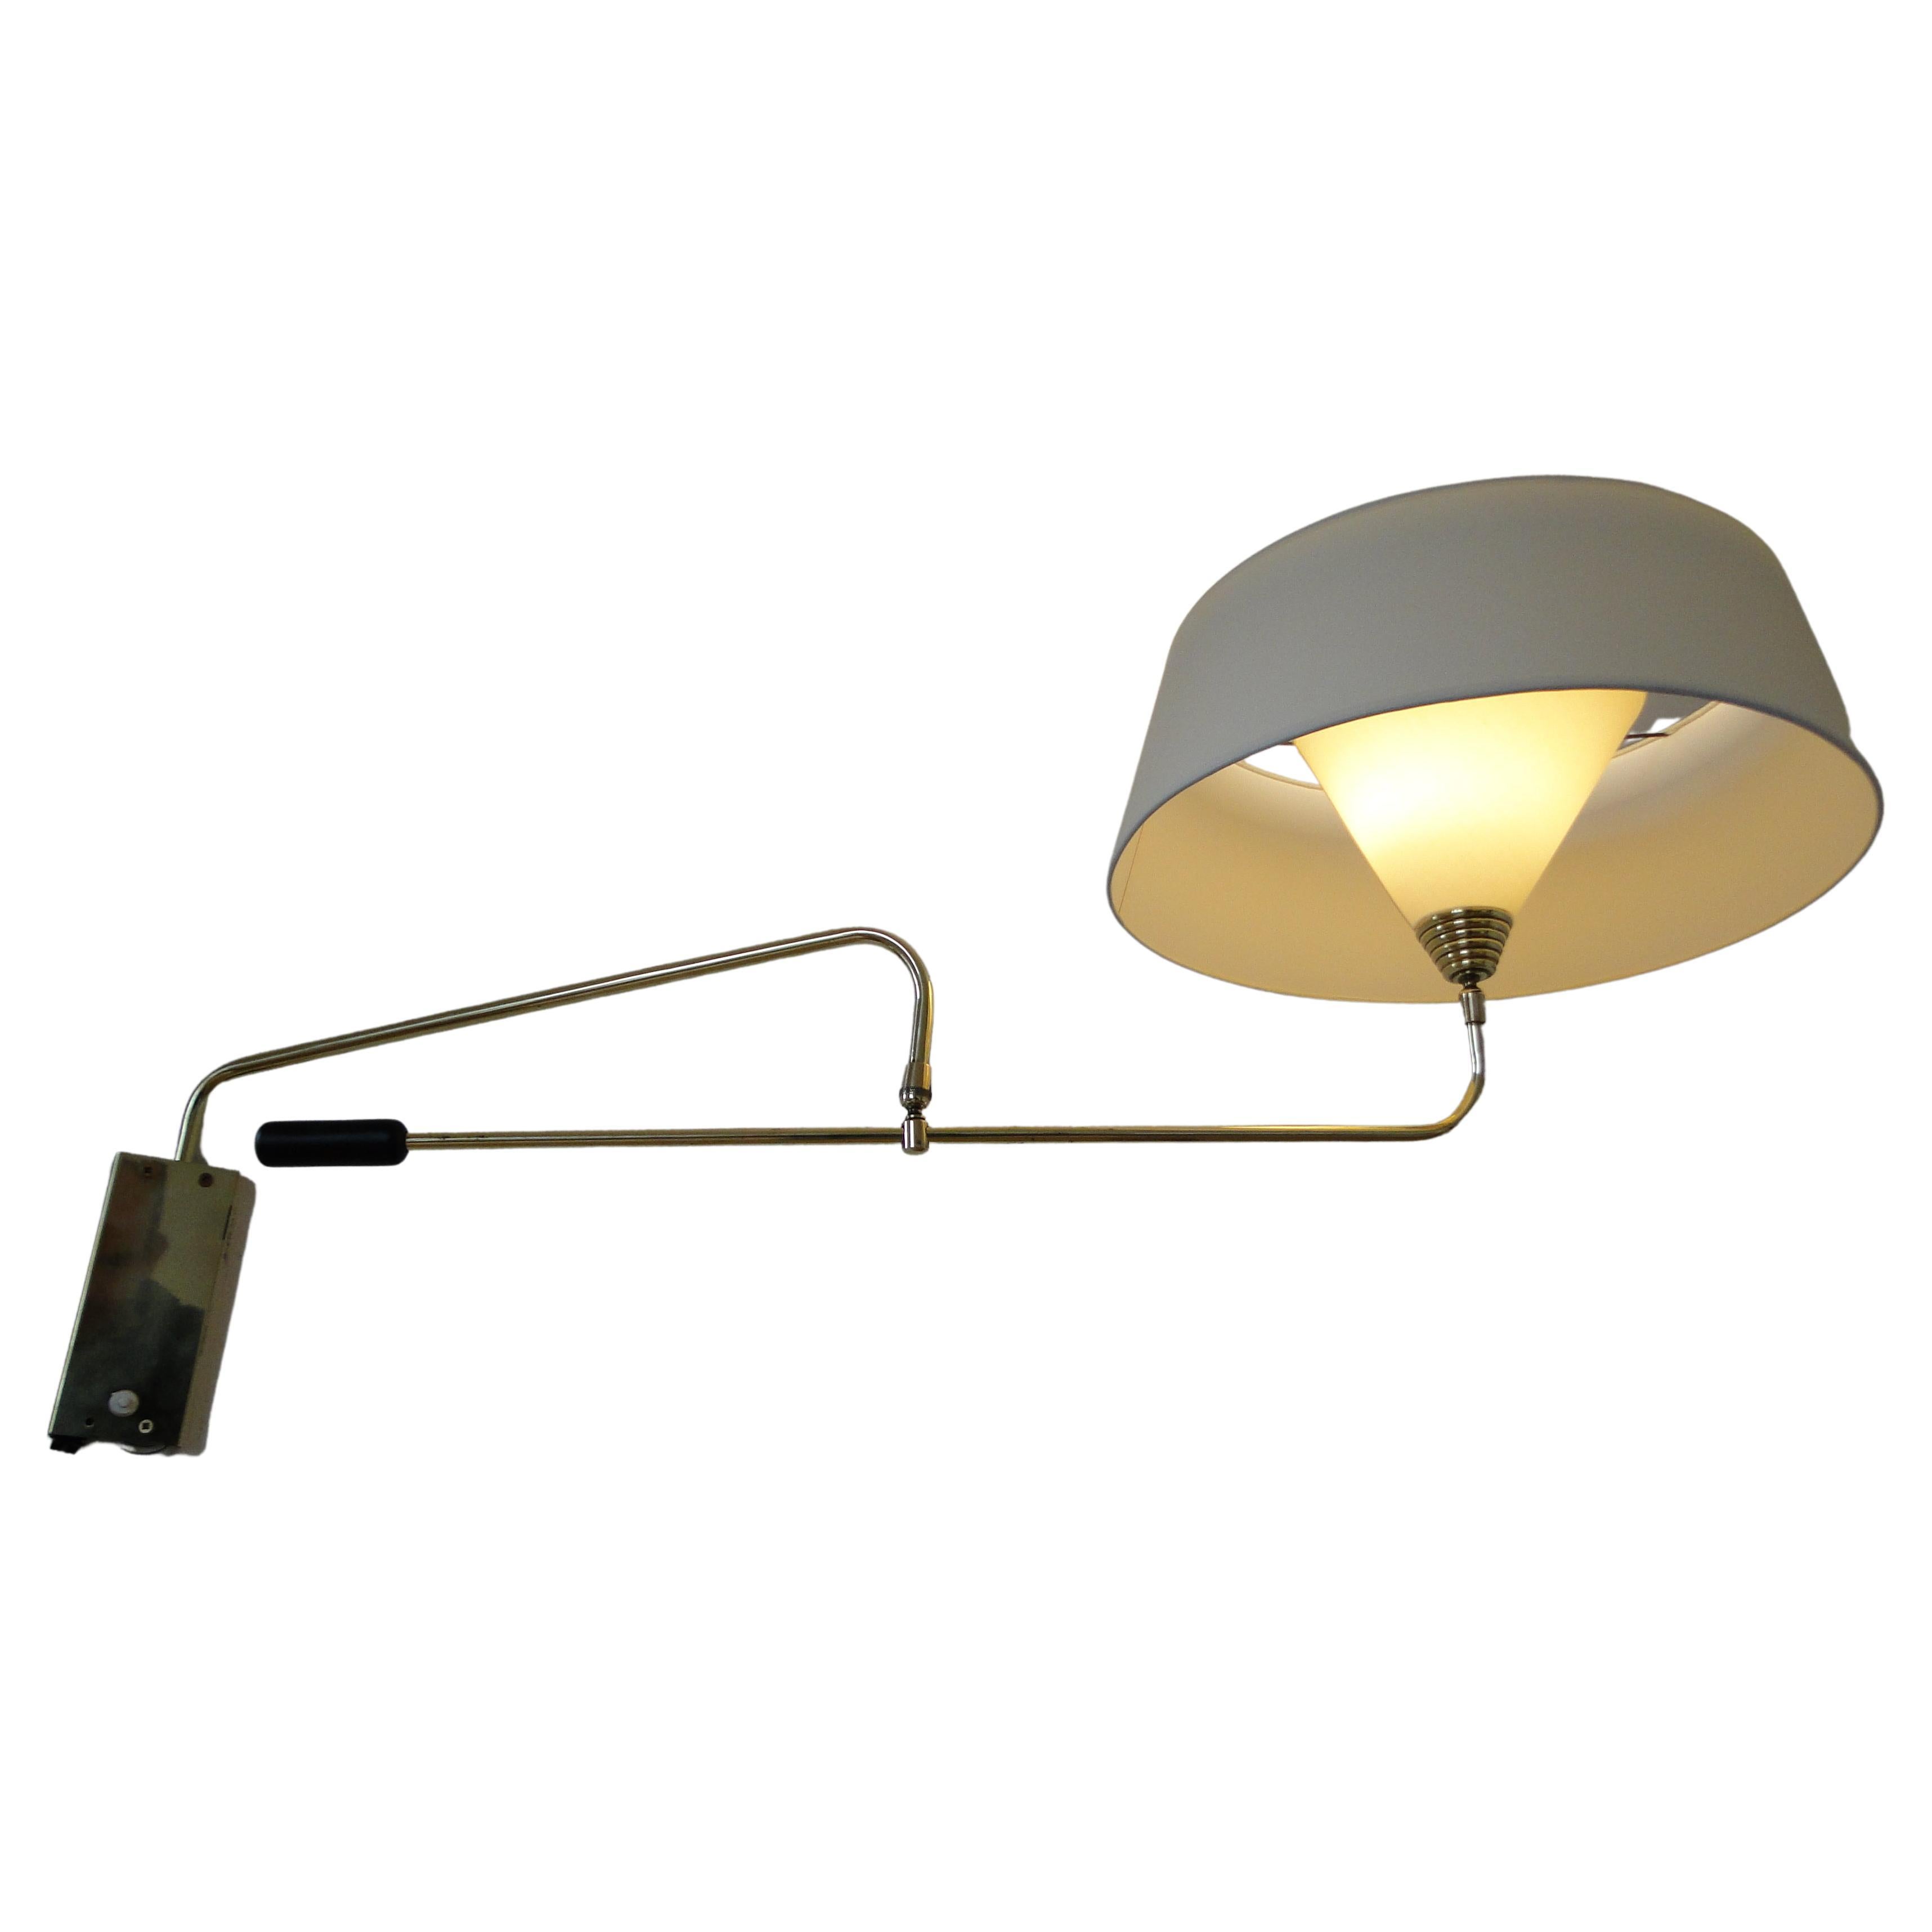 Large wall lamp with counterweight from Maison Arlus, France 60s.

Triple movement, head on ball joint with orientation rod, position of the main arm adjustable by a 